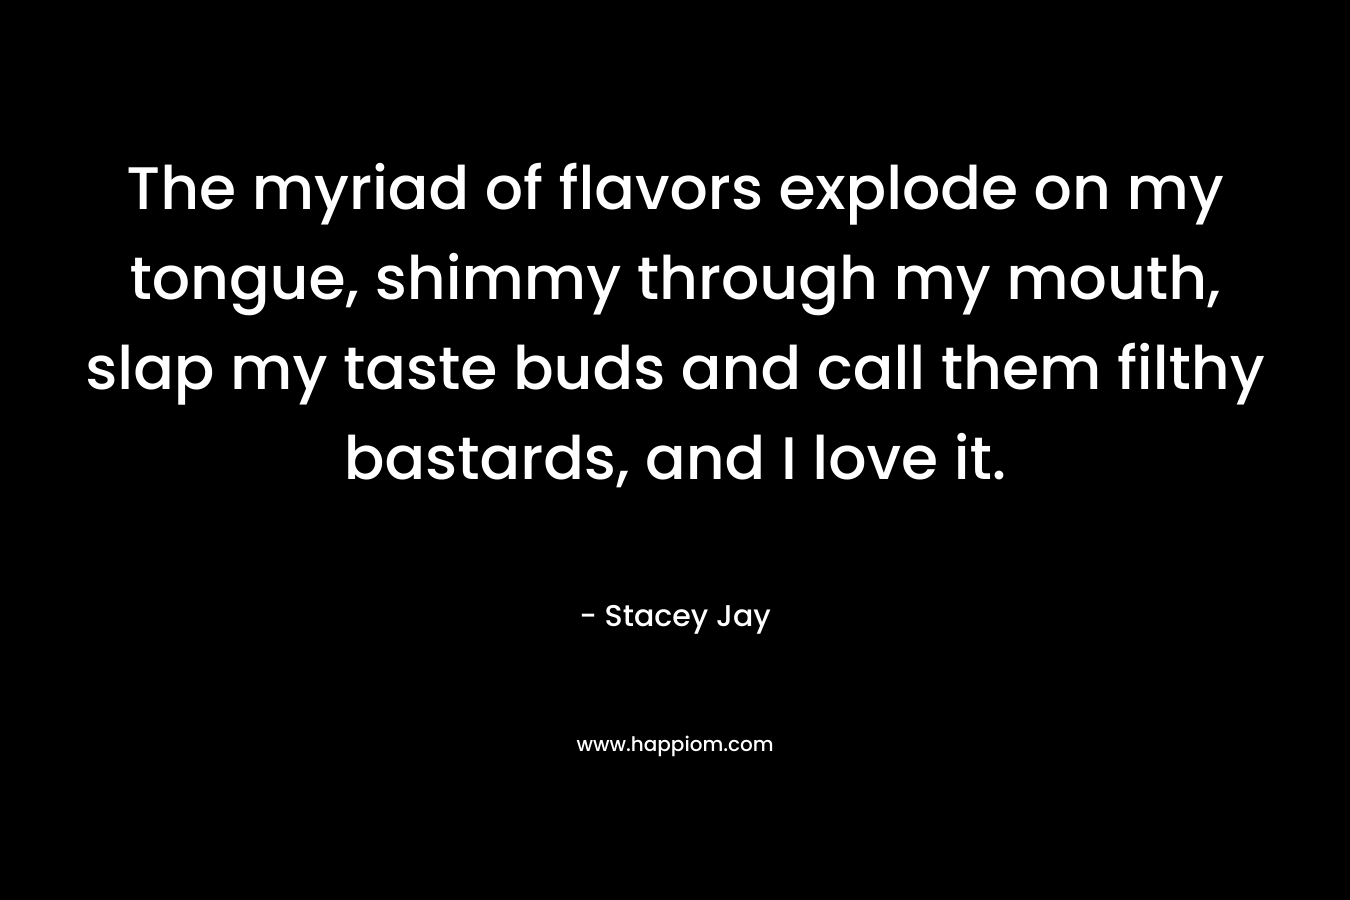 The myriad of flavors explode on my tongue, shimmy through my mouth, slap my taste buds and call them filthy bastards, and I love it.